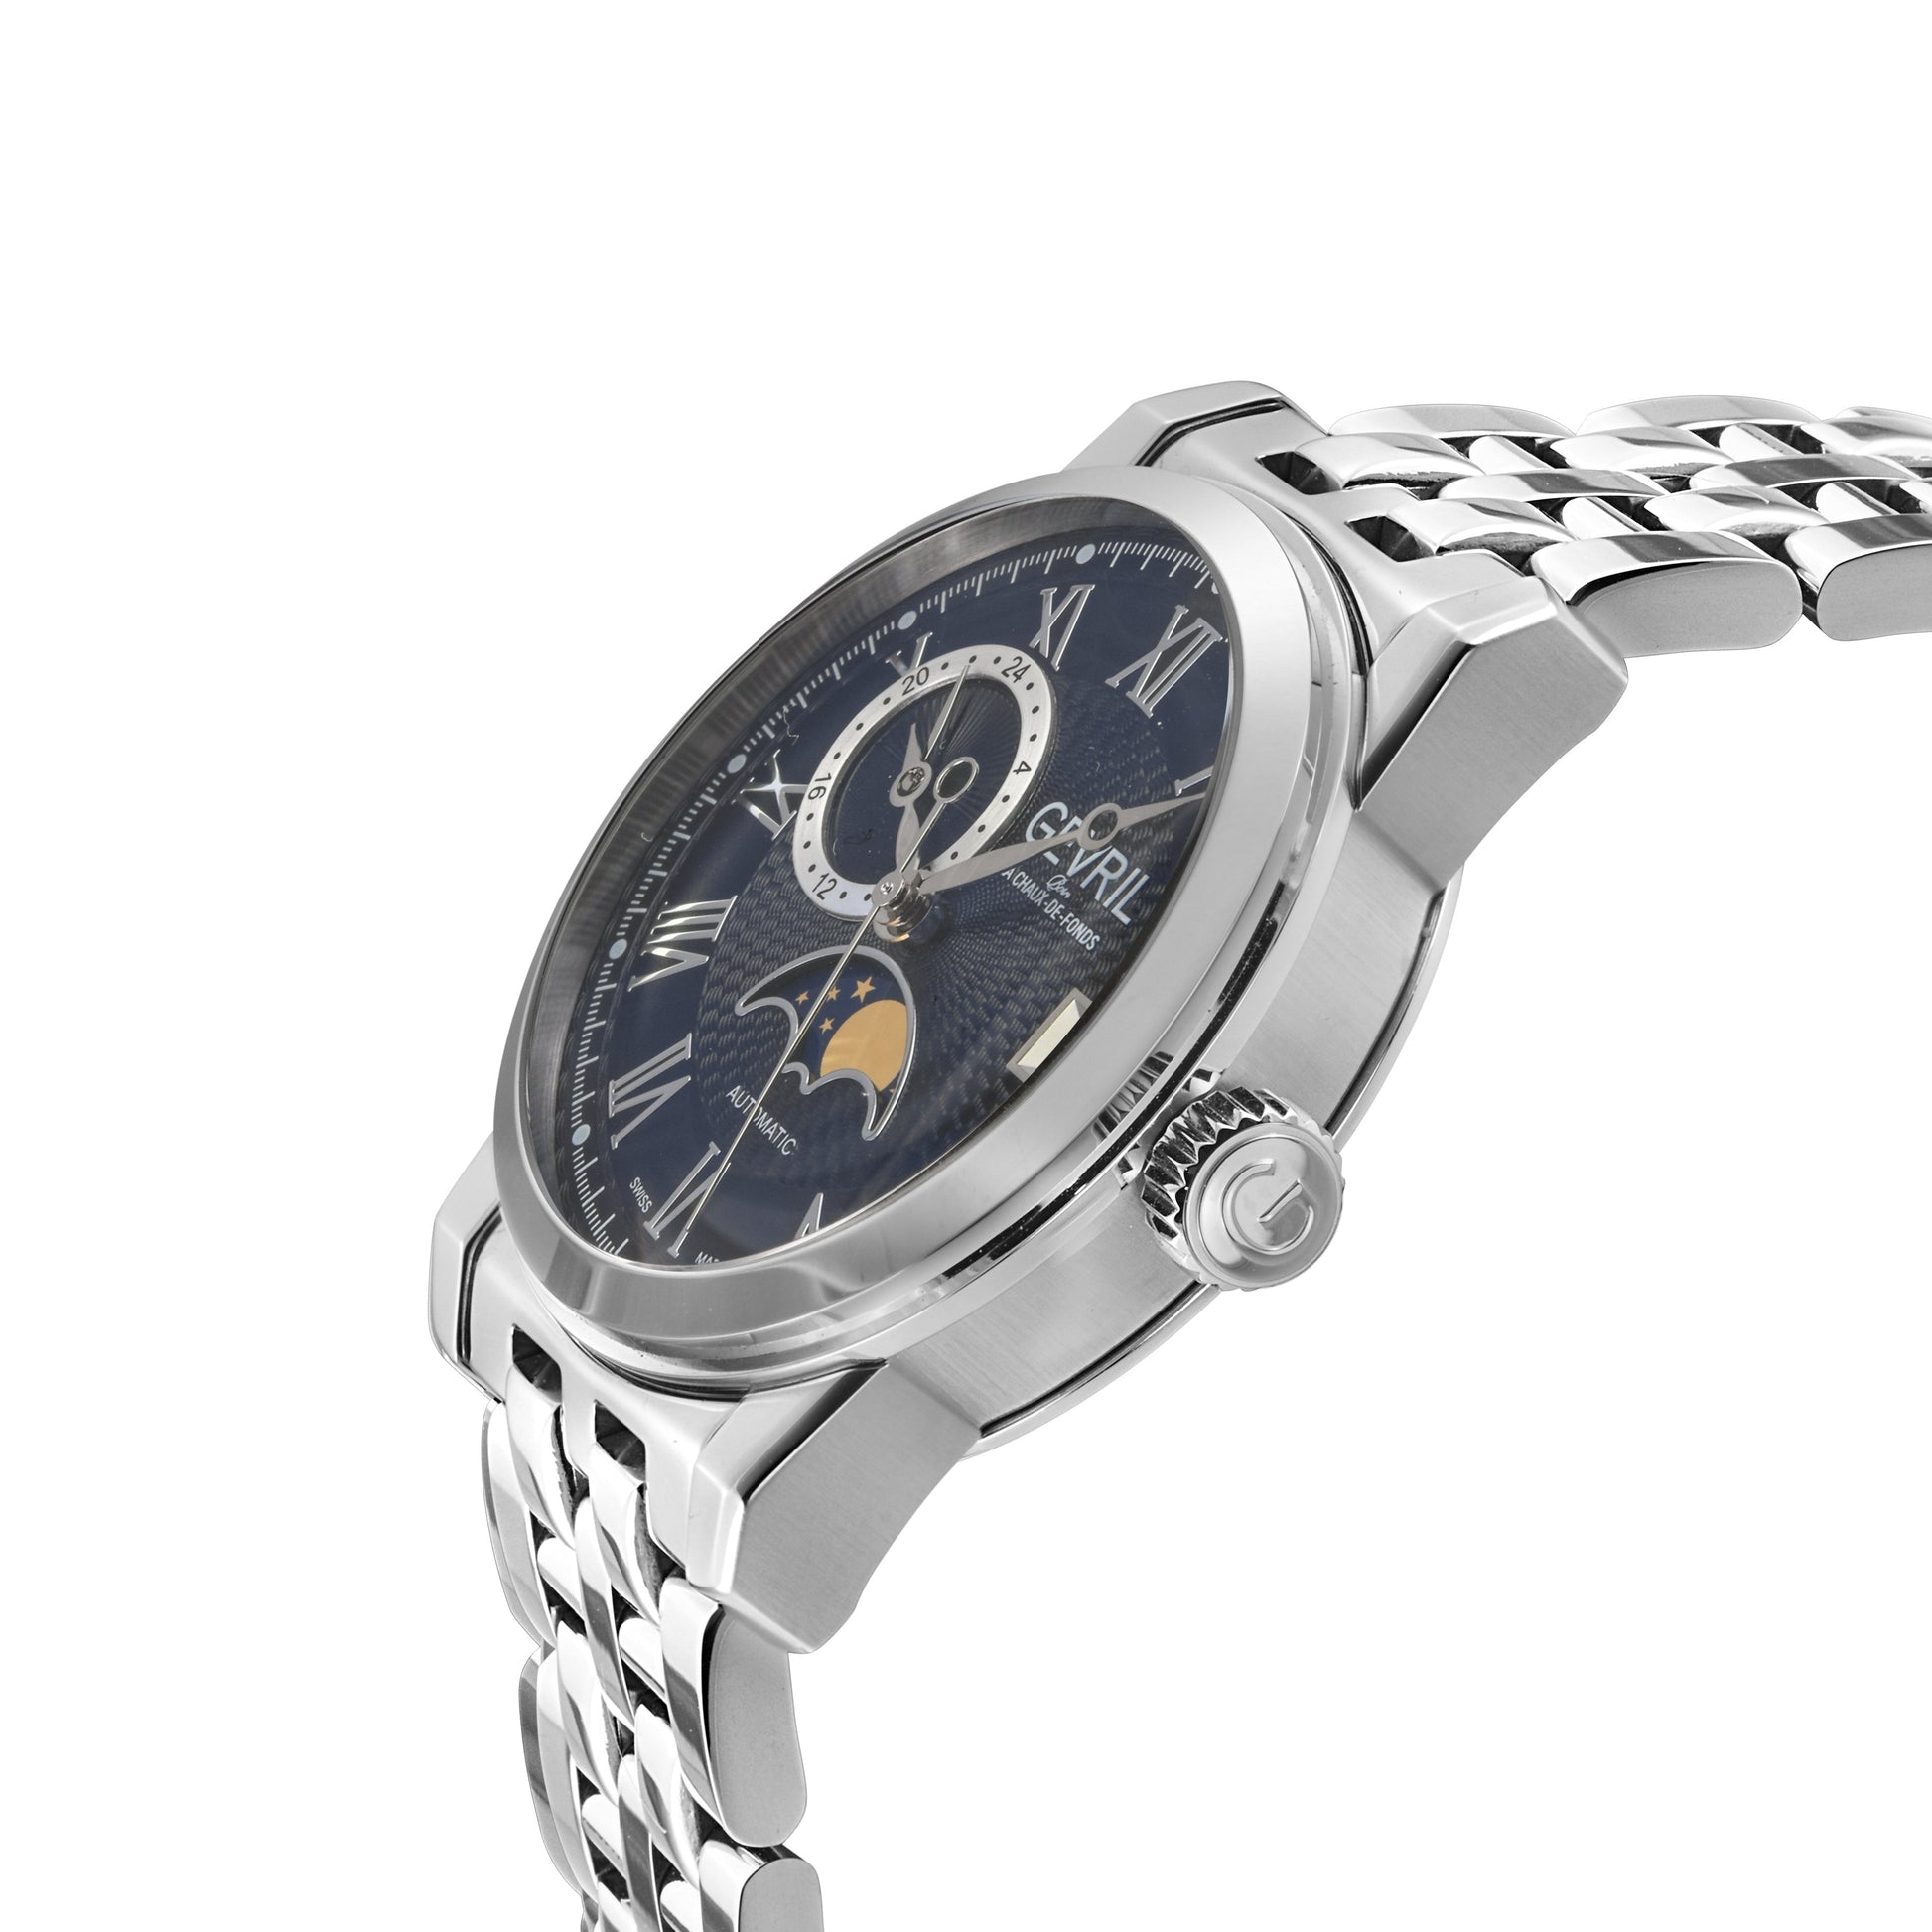 Gevril-Luxury-Swiss-Watches-Gevril Madison Swiss Automatic - Moon Phase-2591